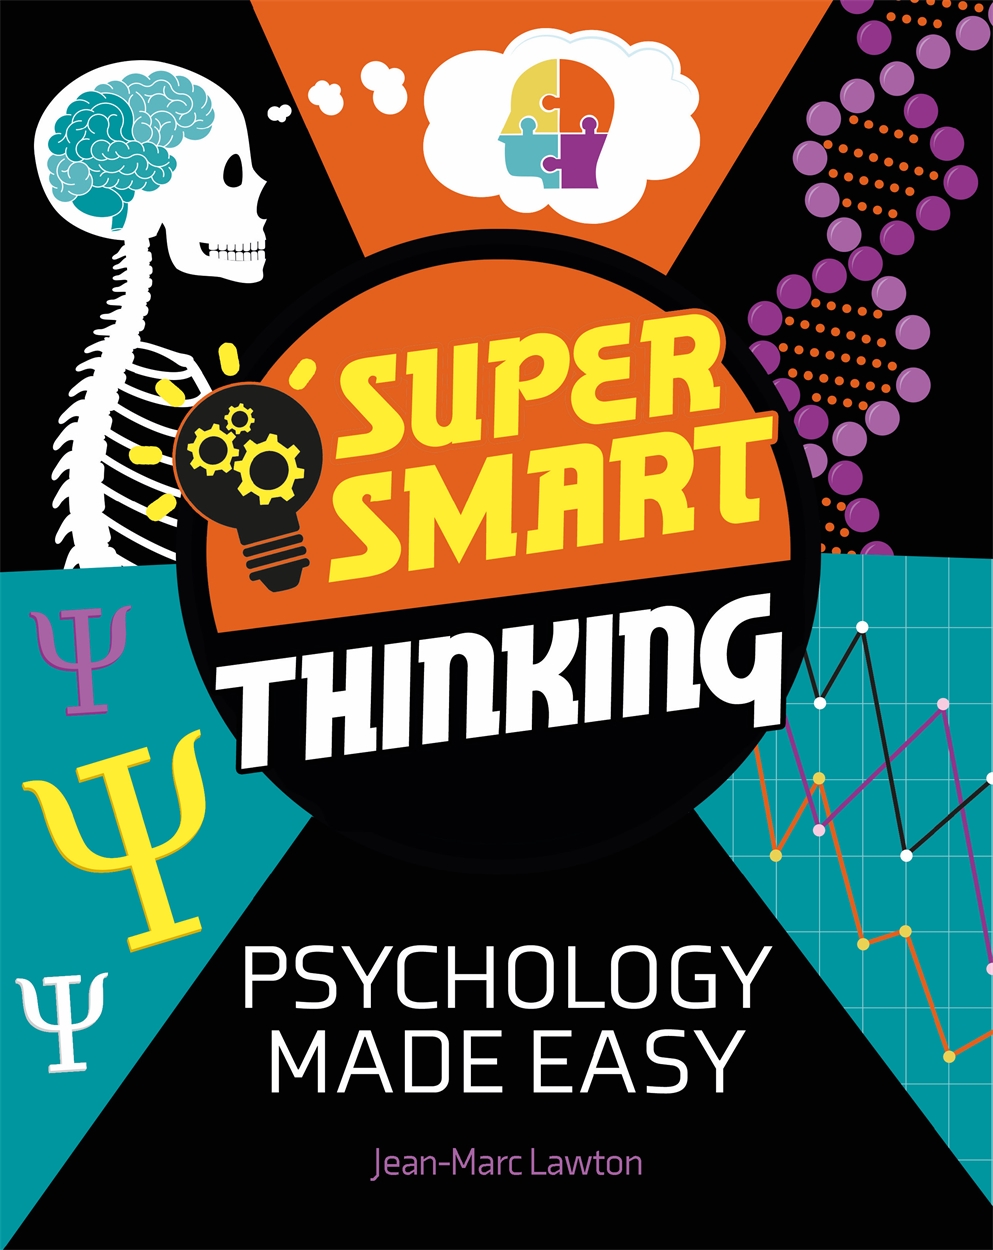 Super Smart Thinking: Psychology Made Easy by Jean-Marc Lawton Hachette UK